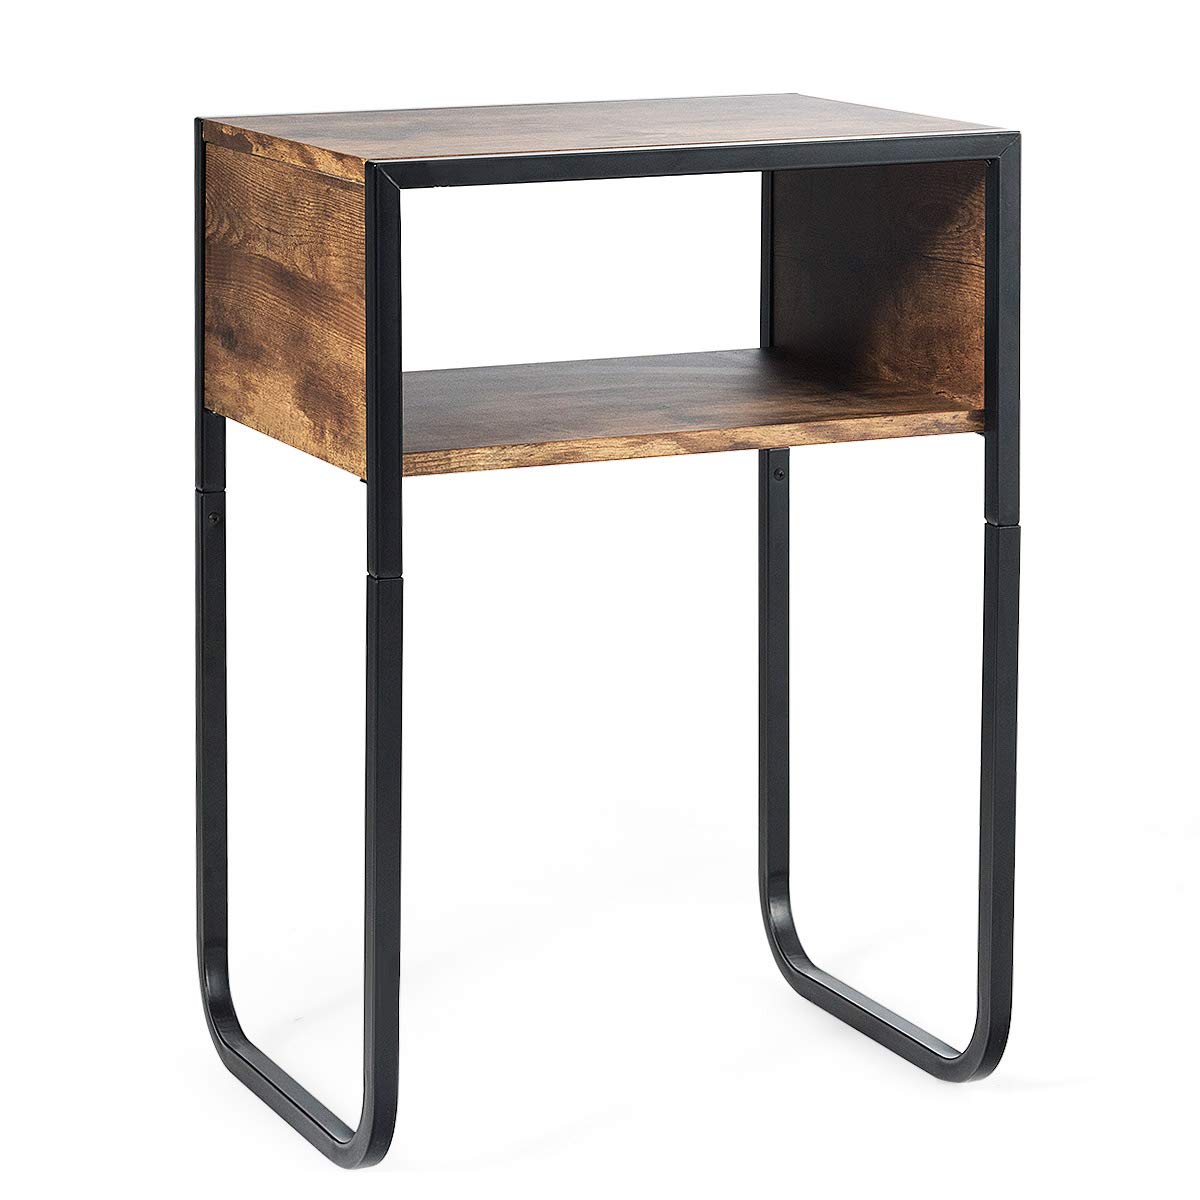 Giantex Side Table Industrial W/Drawer and Metal Frame (2, Rustic Brown)